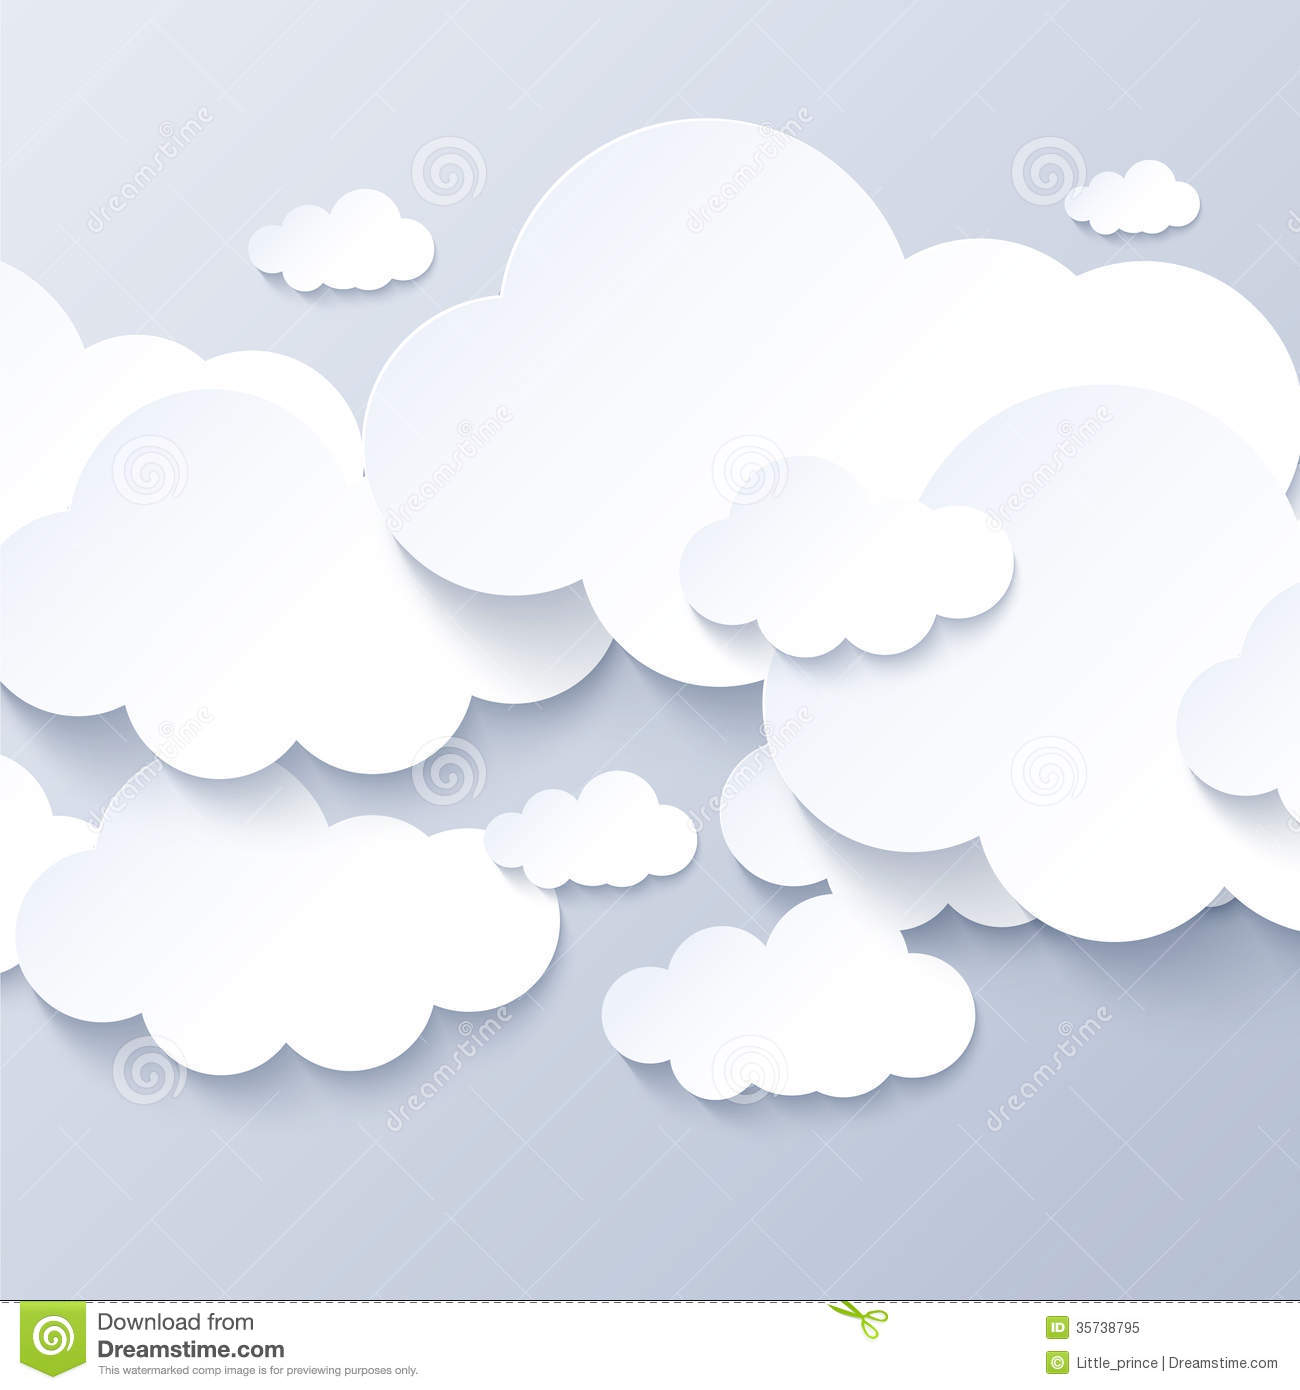 White Clouds On Gray Sky Background Royalty Free Stock Photo   Image